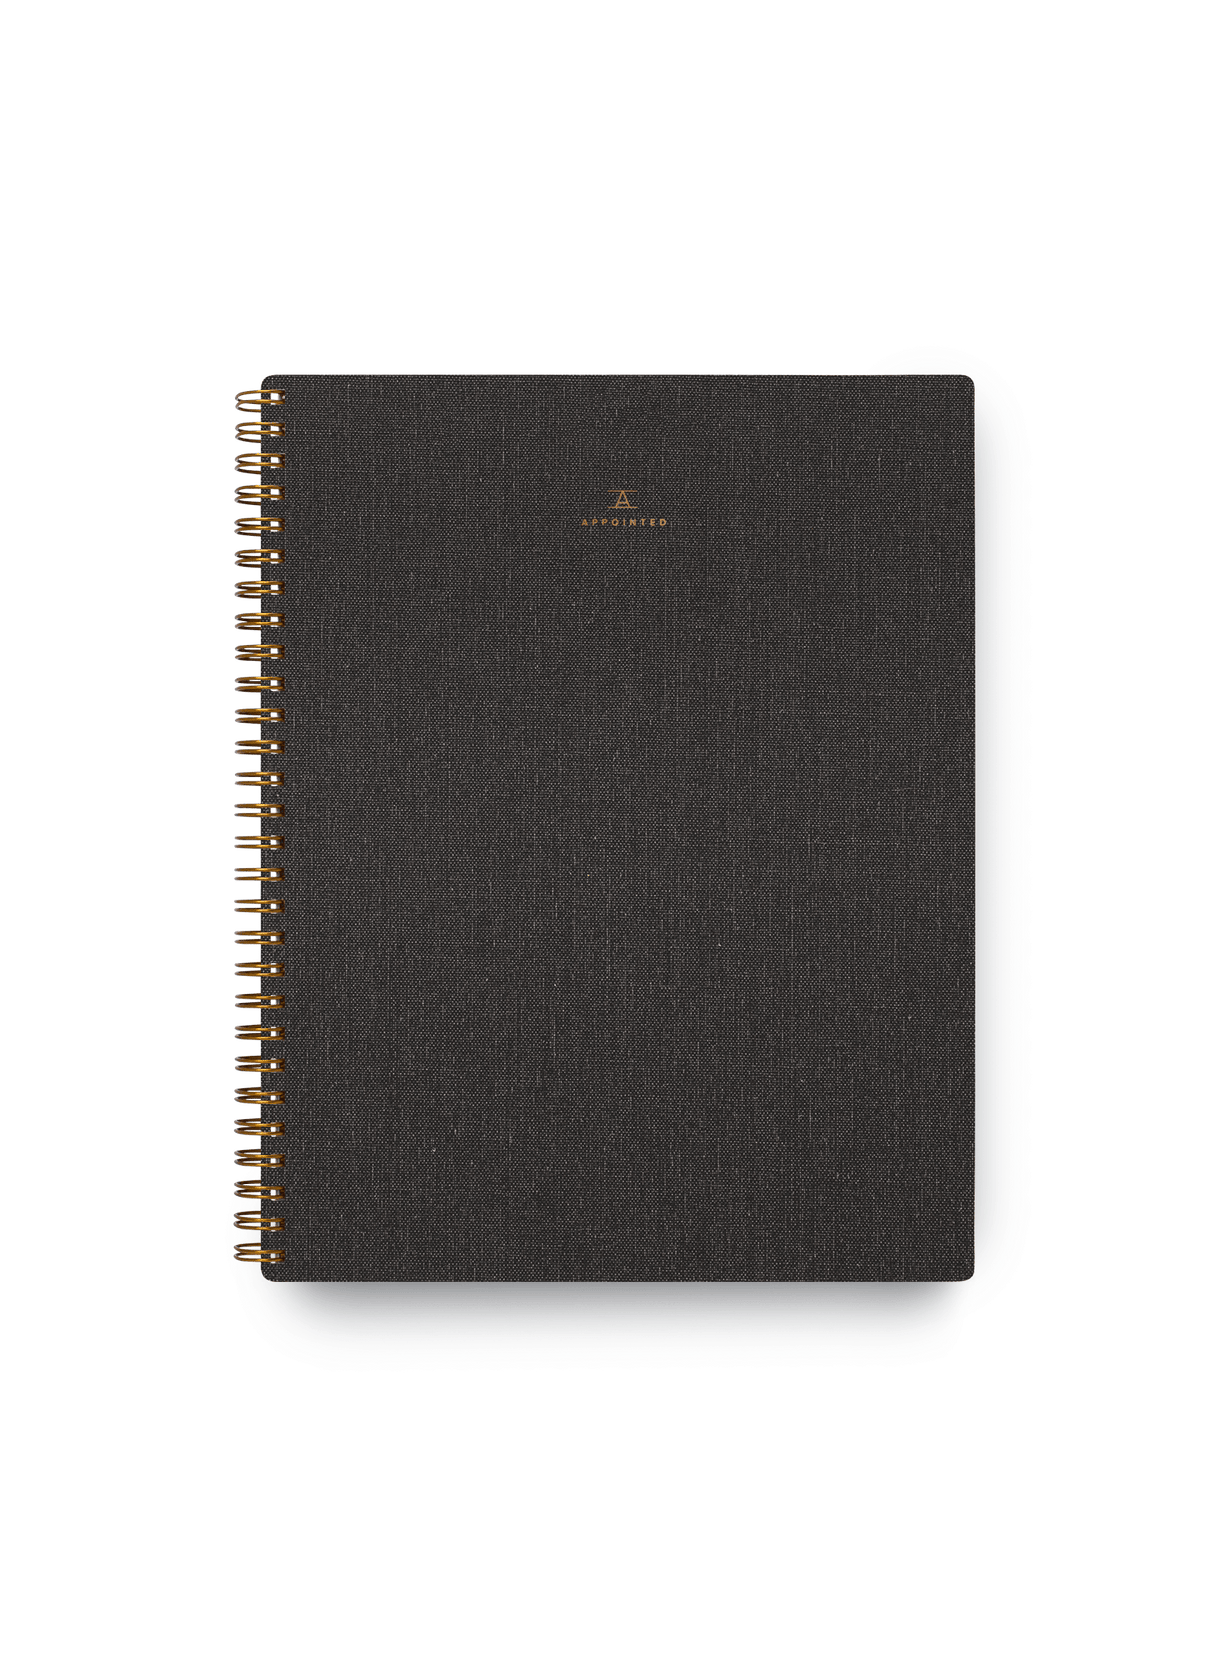 Appointed Notebook in Charcoal Gray bookcloth with brass wire-o binding front view || Charcoal Gray